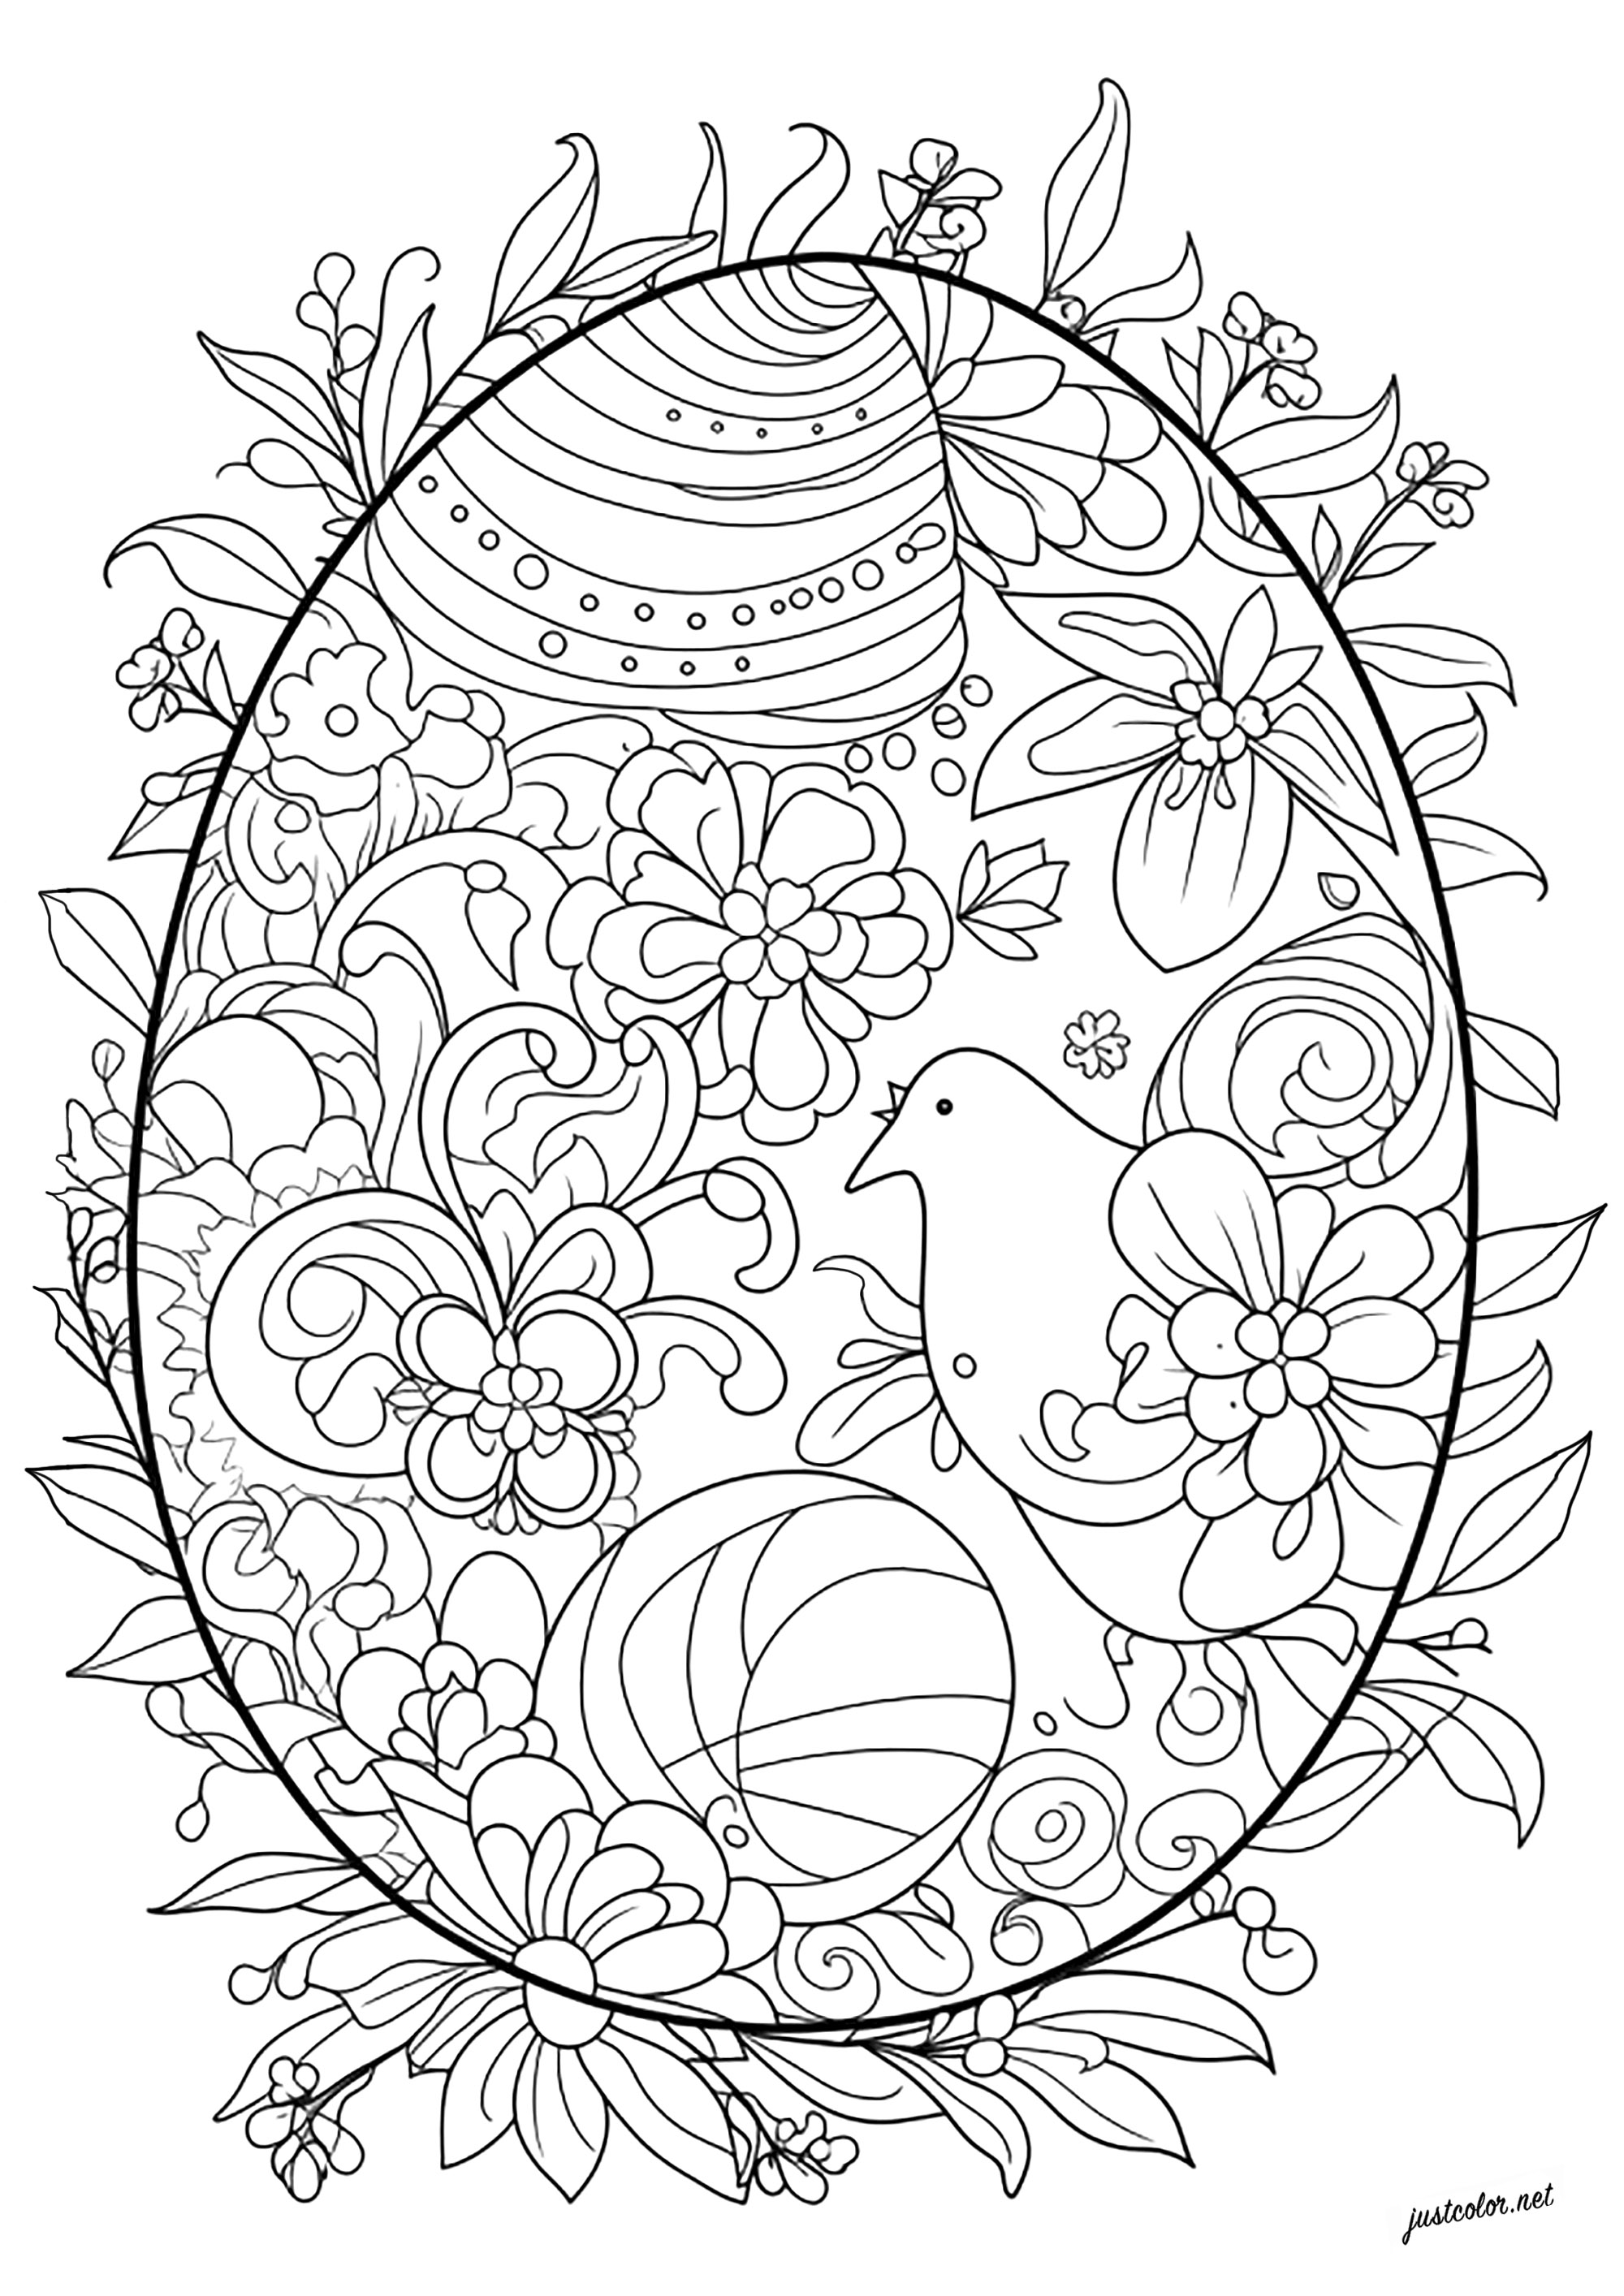 Complex coloring of an Easter eggMany abstract patterns, flowers and even a chicken to color in this beautiful Easter egg